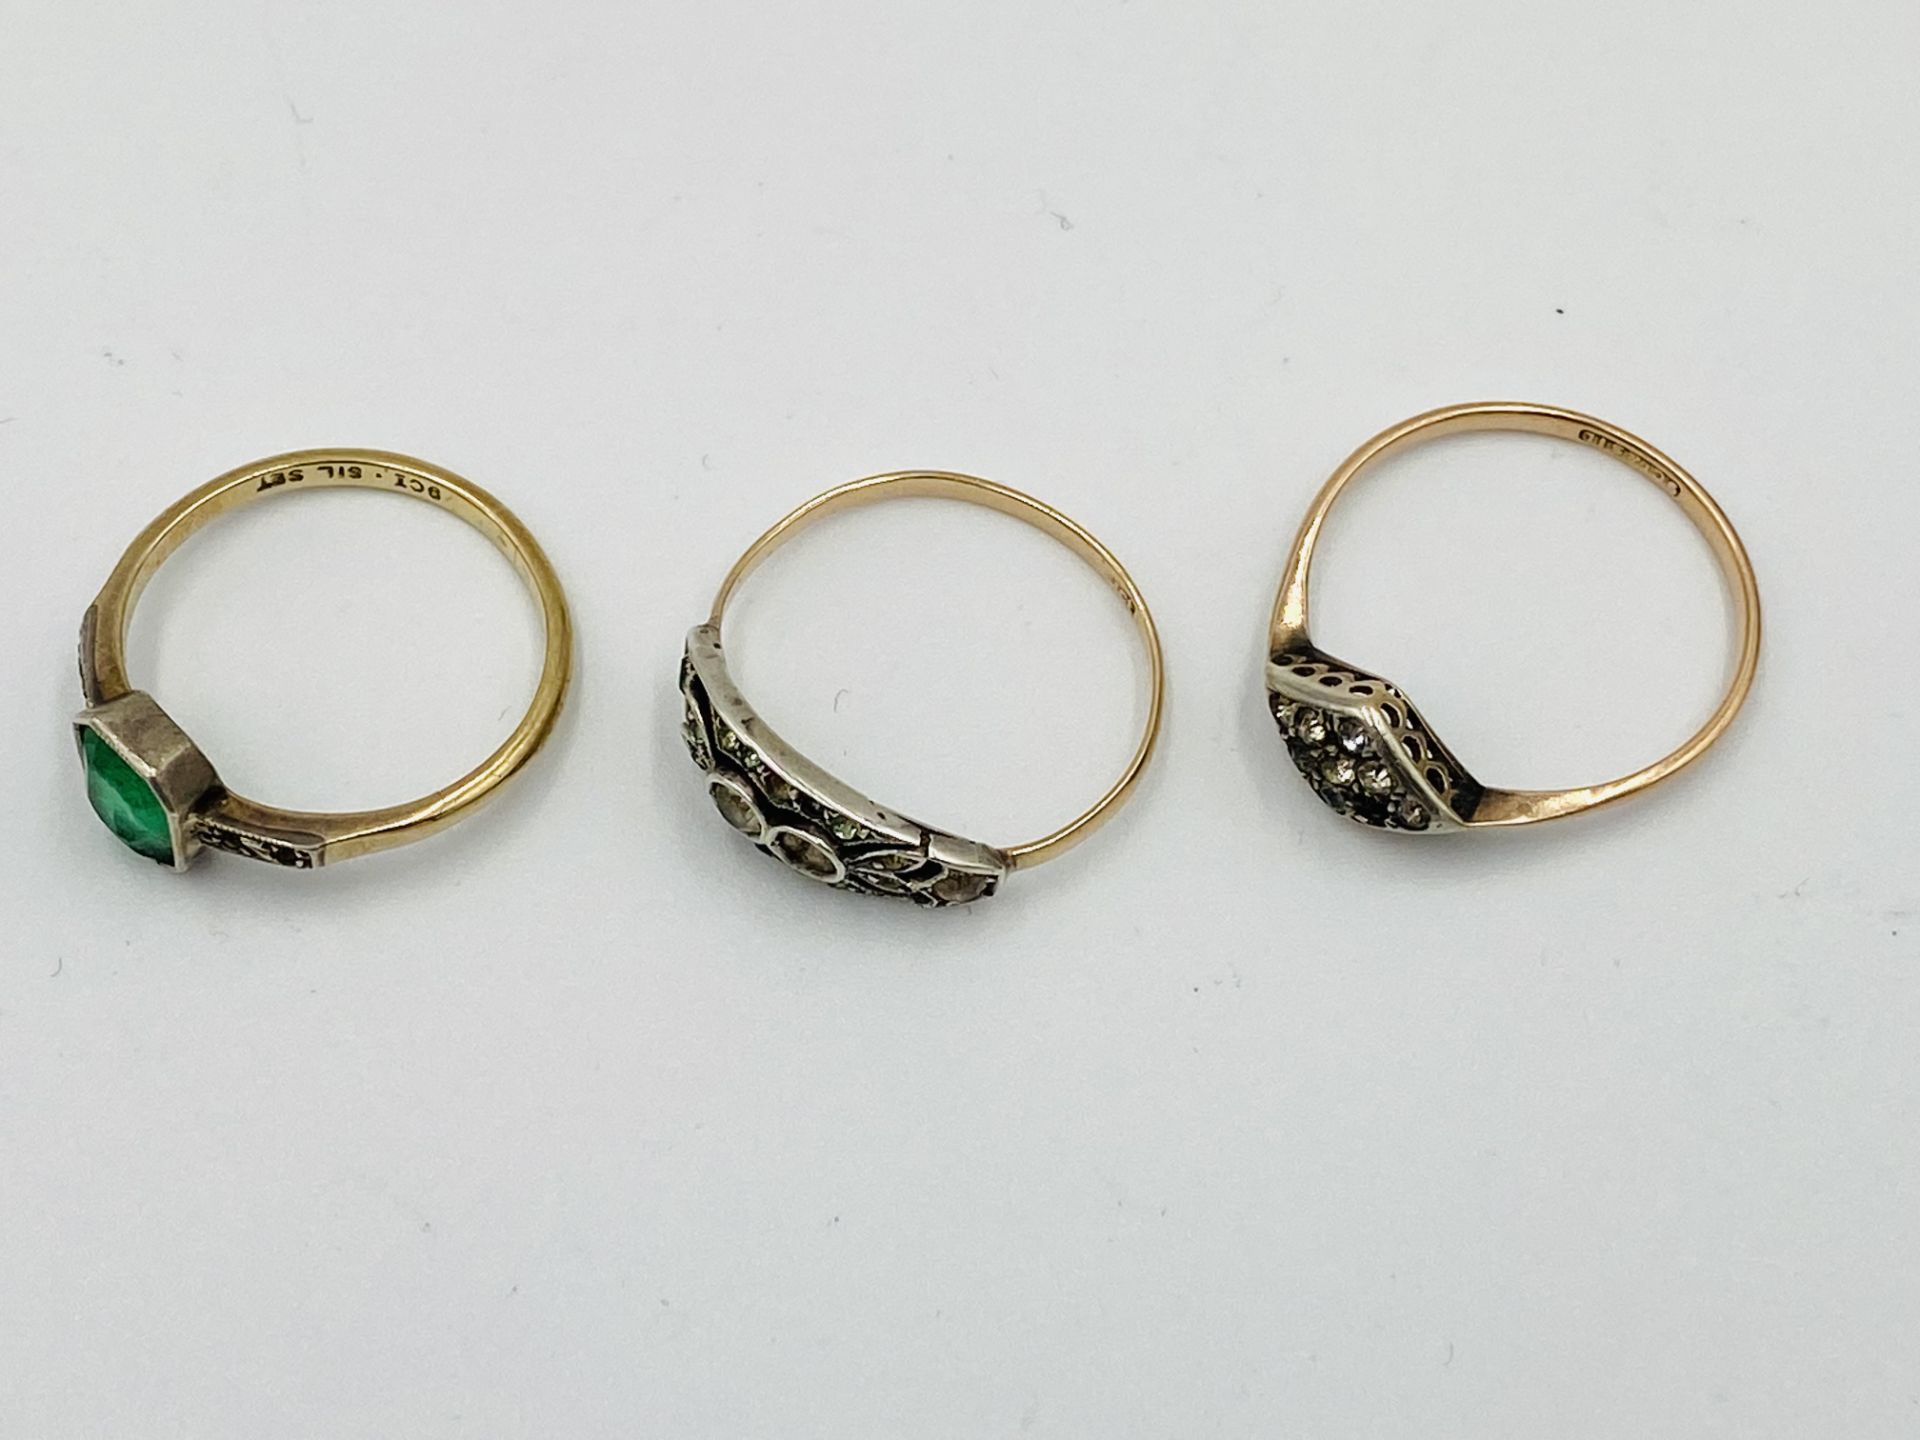 Three 9ct gold rings together with a pair of earrings - Image 5 of 5